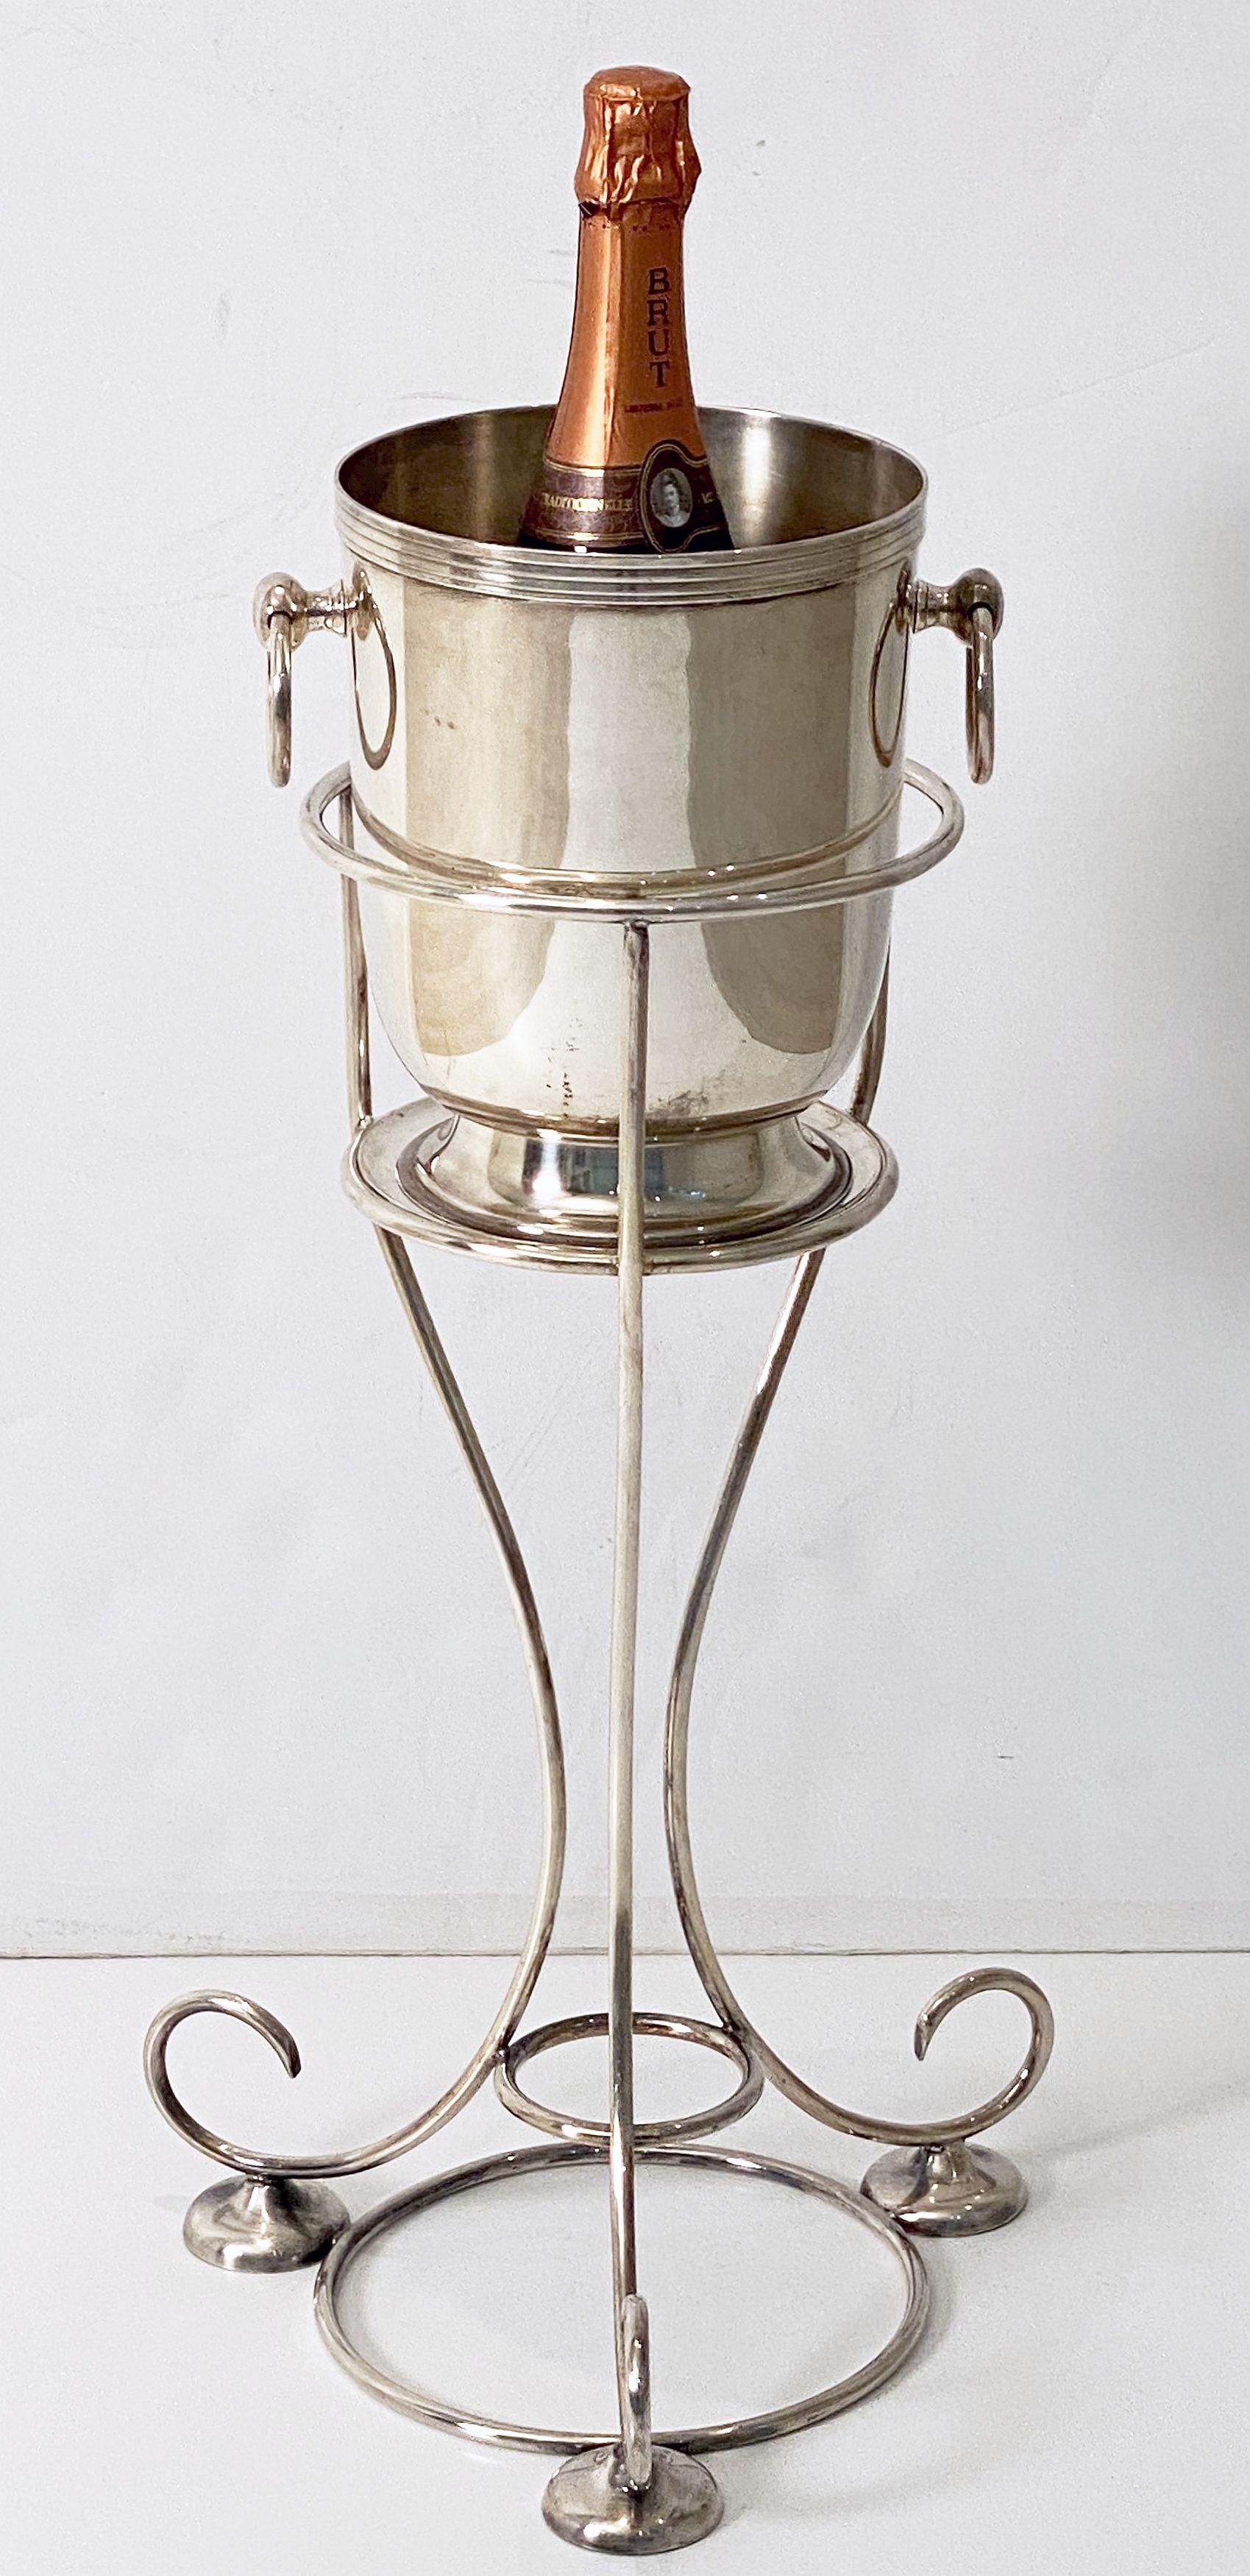 A period English champagne bucket or wine cooler with ring handles on a stylish frame stand of fine plate silver, from the Art Deco era by the celebrated silversmiths, Yeoman of England - the silver giftware supplier to Harrods and other prestigious